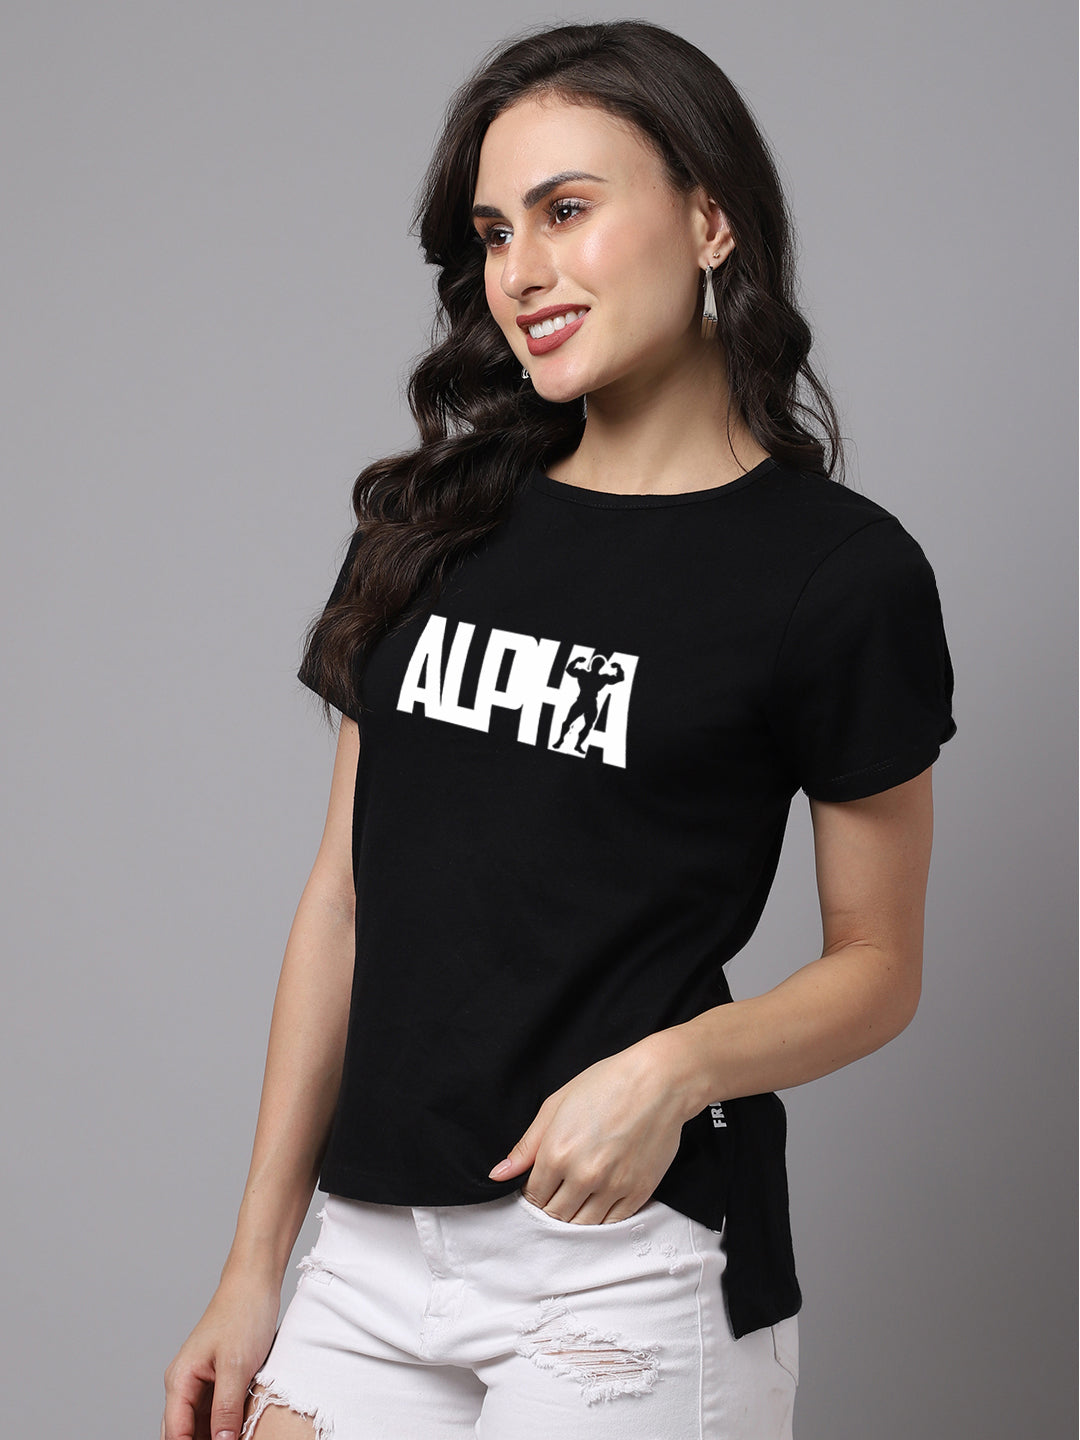 Women Slit Sleeves Alpha Printed Pure Cotton T-Shirt - Friskers